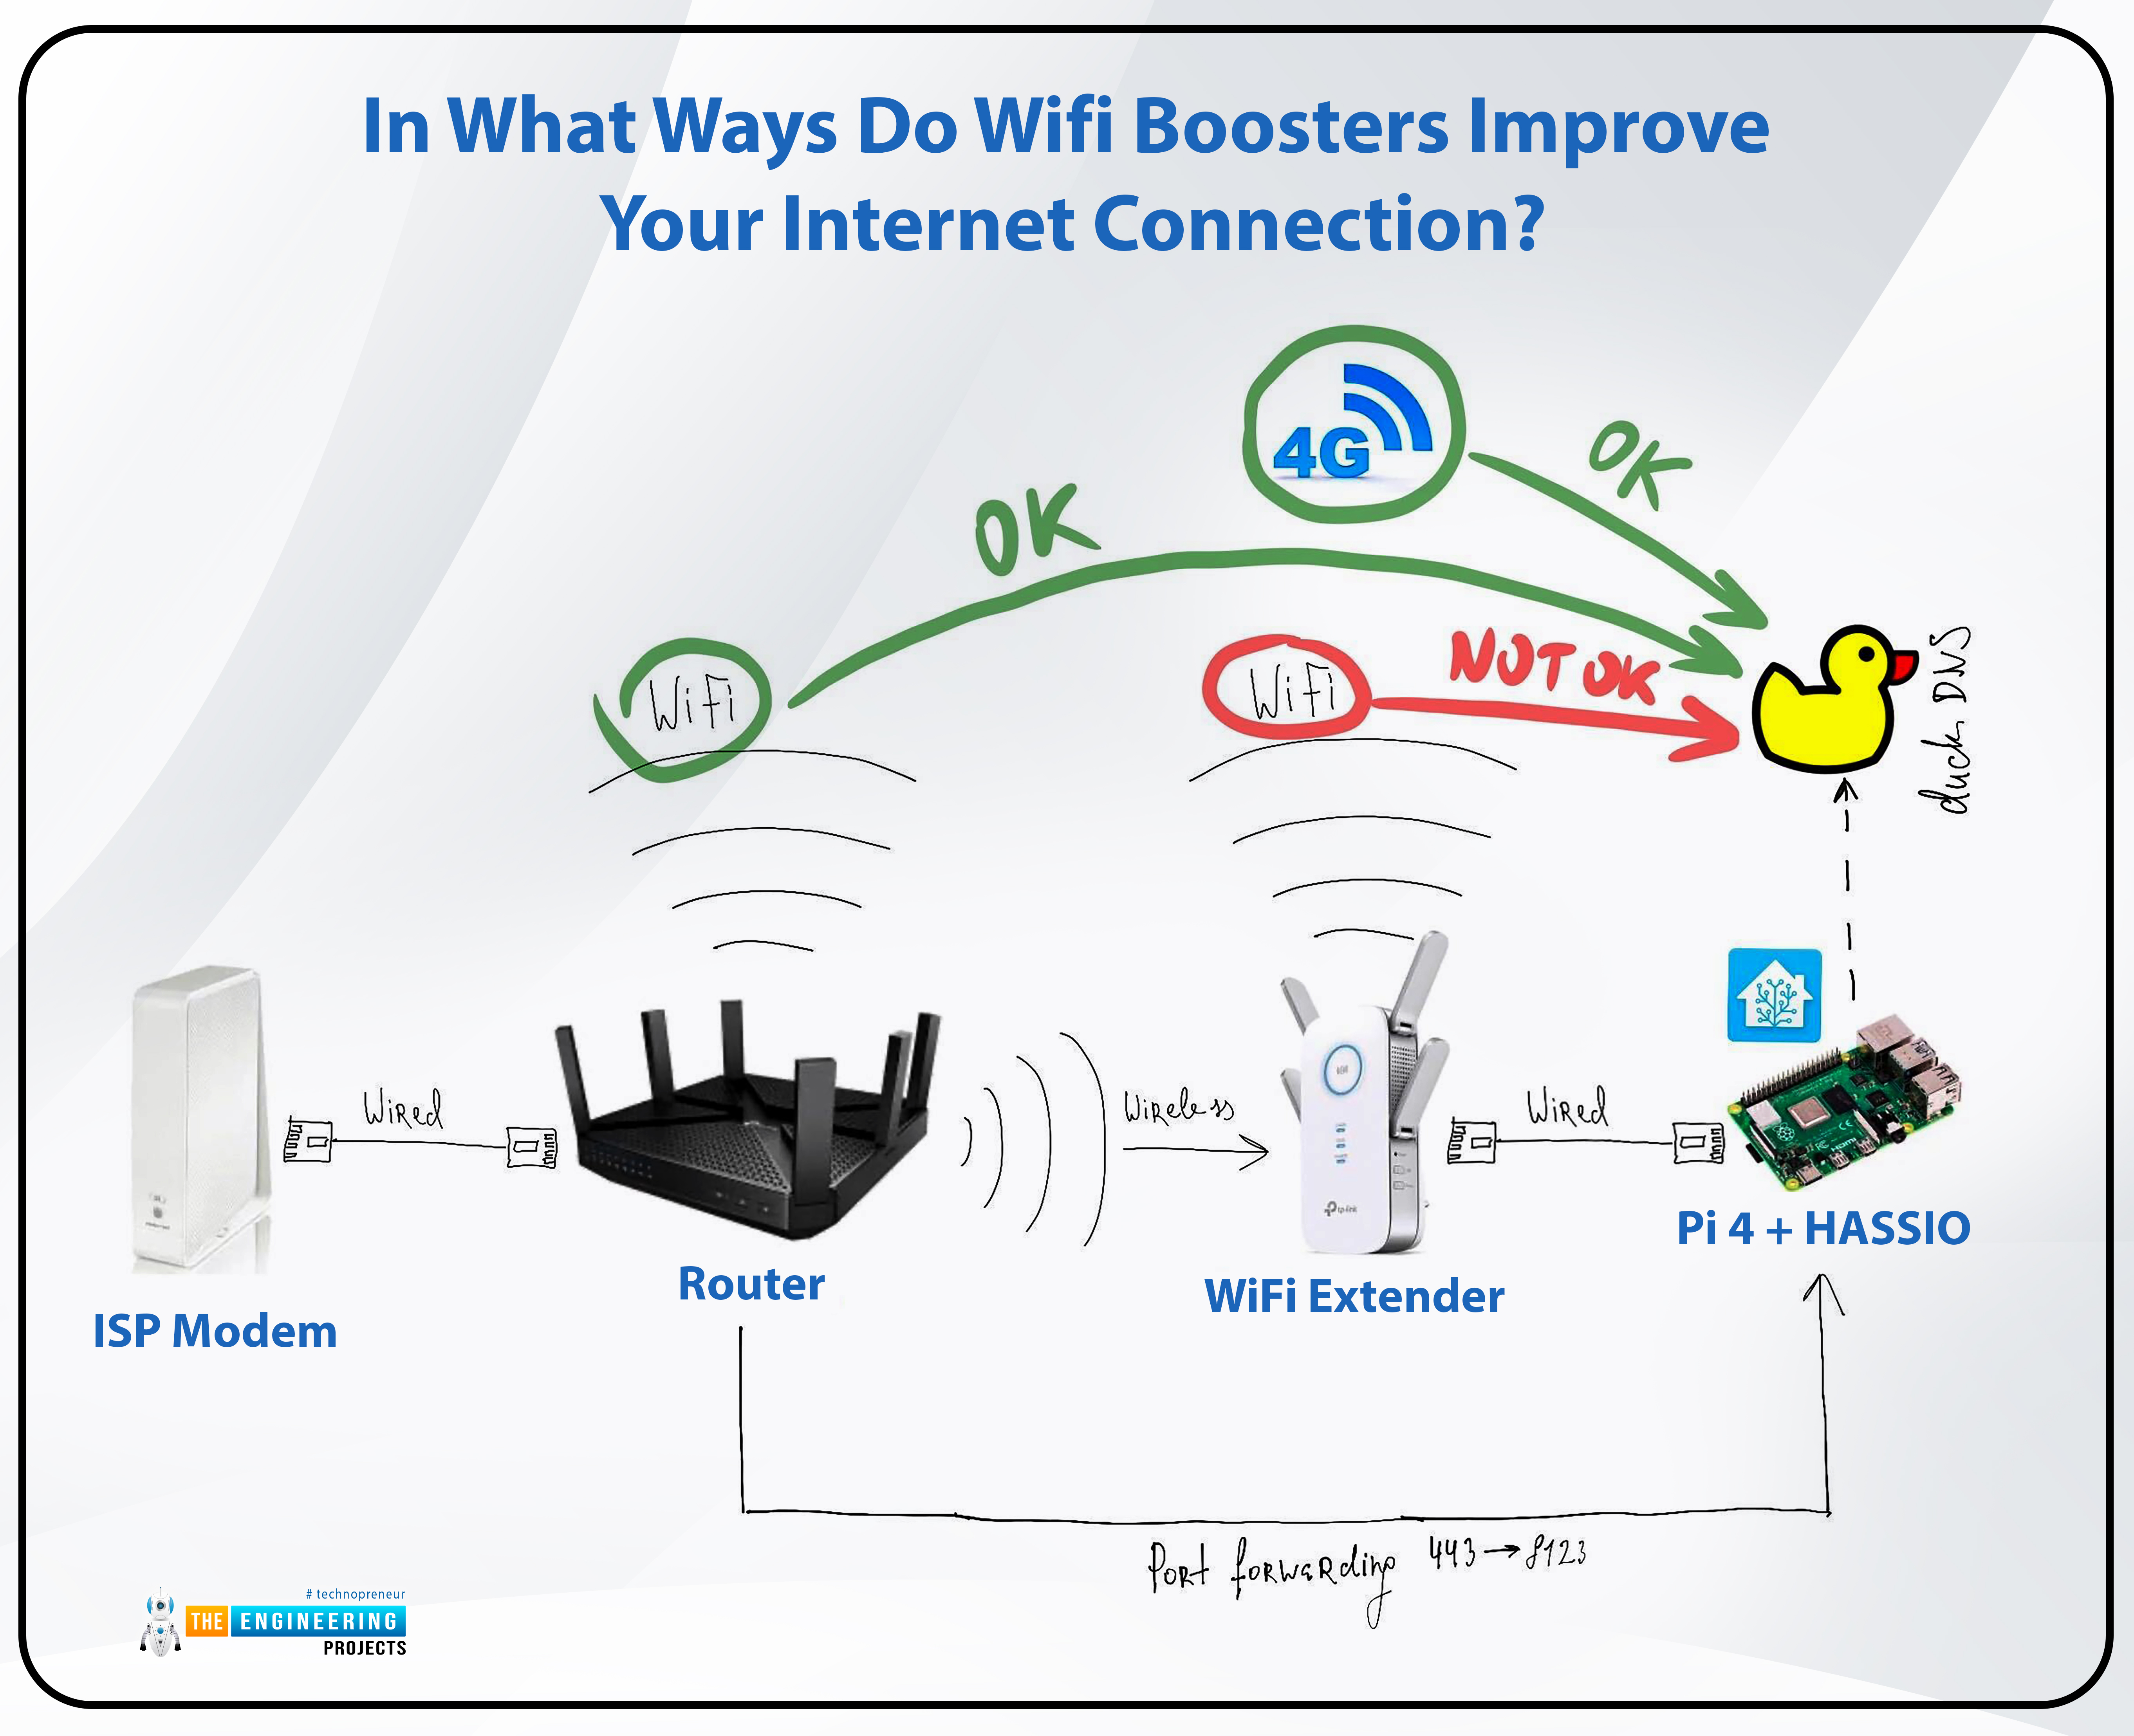 Create a wifi Extender with a Raspberry Pi 4, wifi extender with rpi4, rpi4 wifi extender, wifi extender rpi4, extend wifi with raspberry pi 4